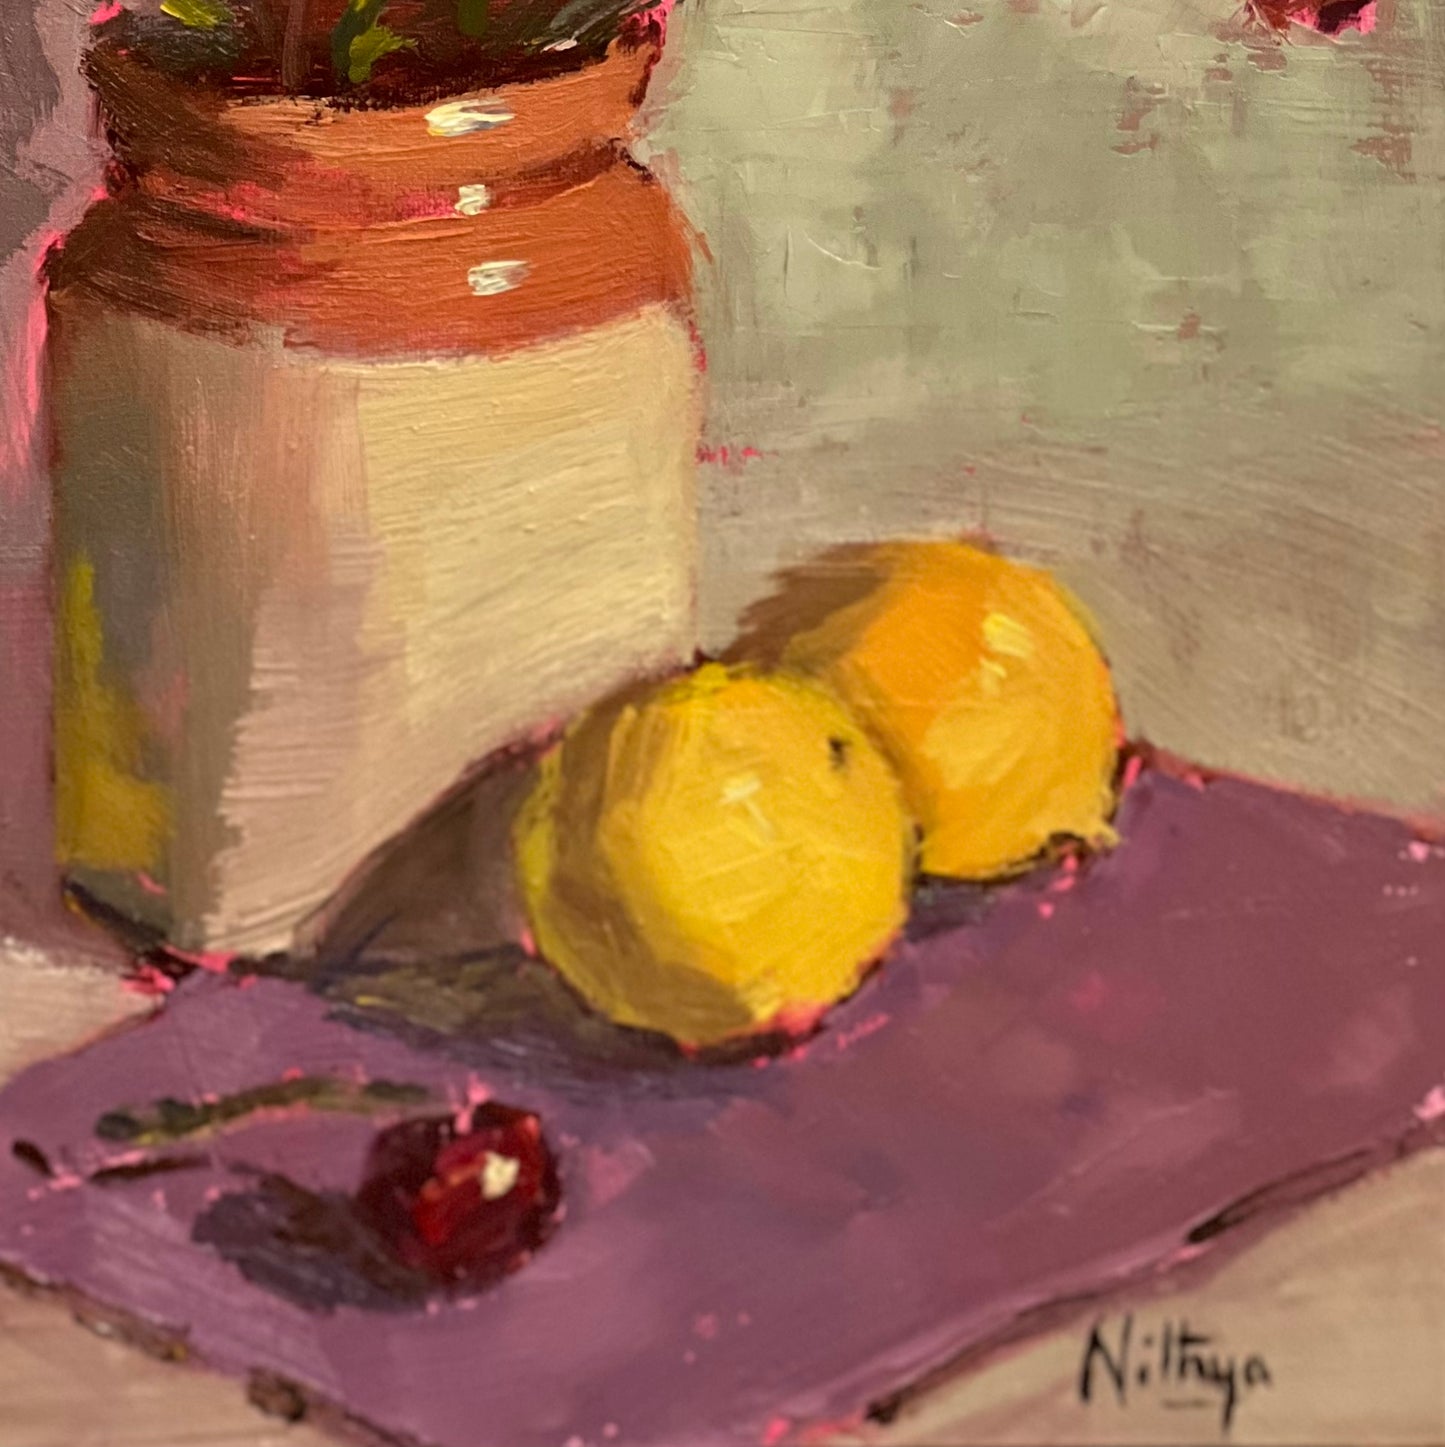 Lemons and Pink Flowers in a jar